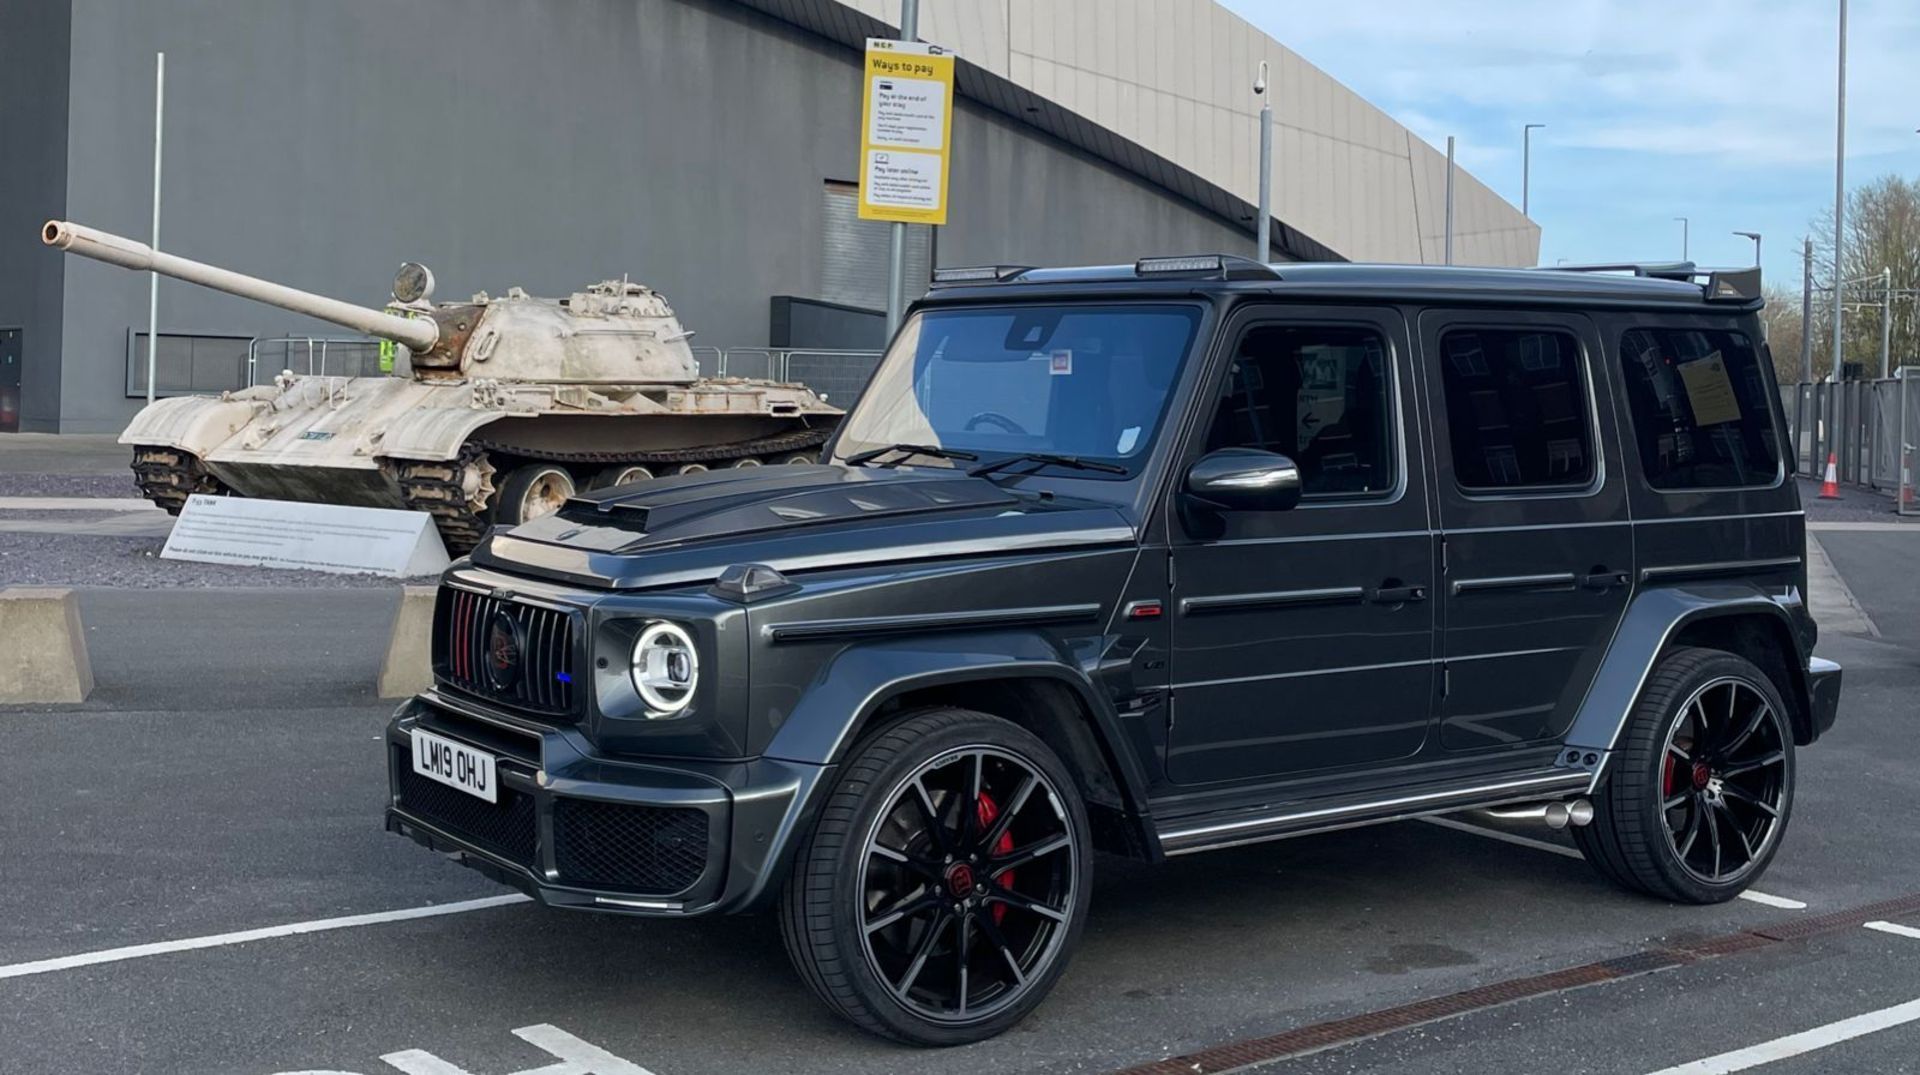 MERCEDES G63 BRABUS WIDE-STAR 800 STYLING GREY WITH BLACK LEATHER INTERIOR